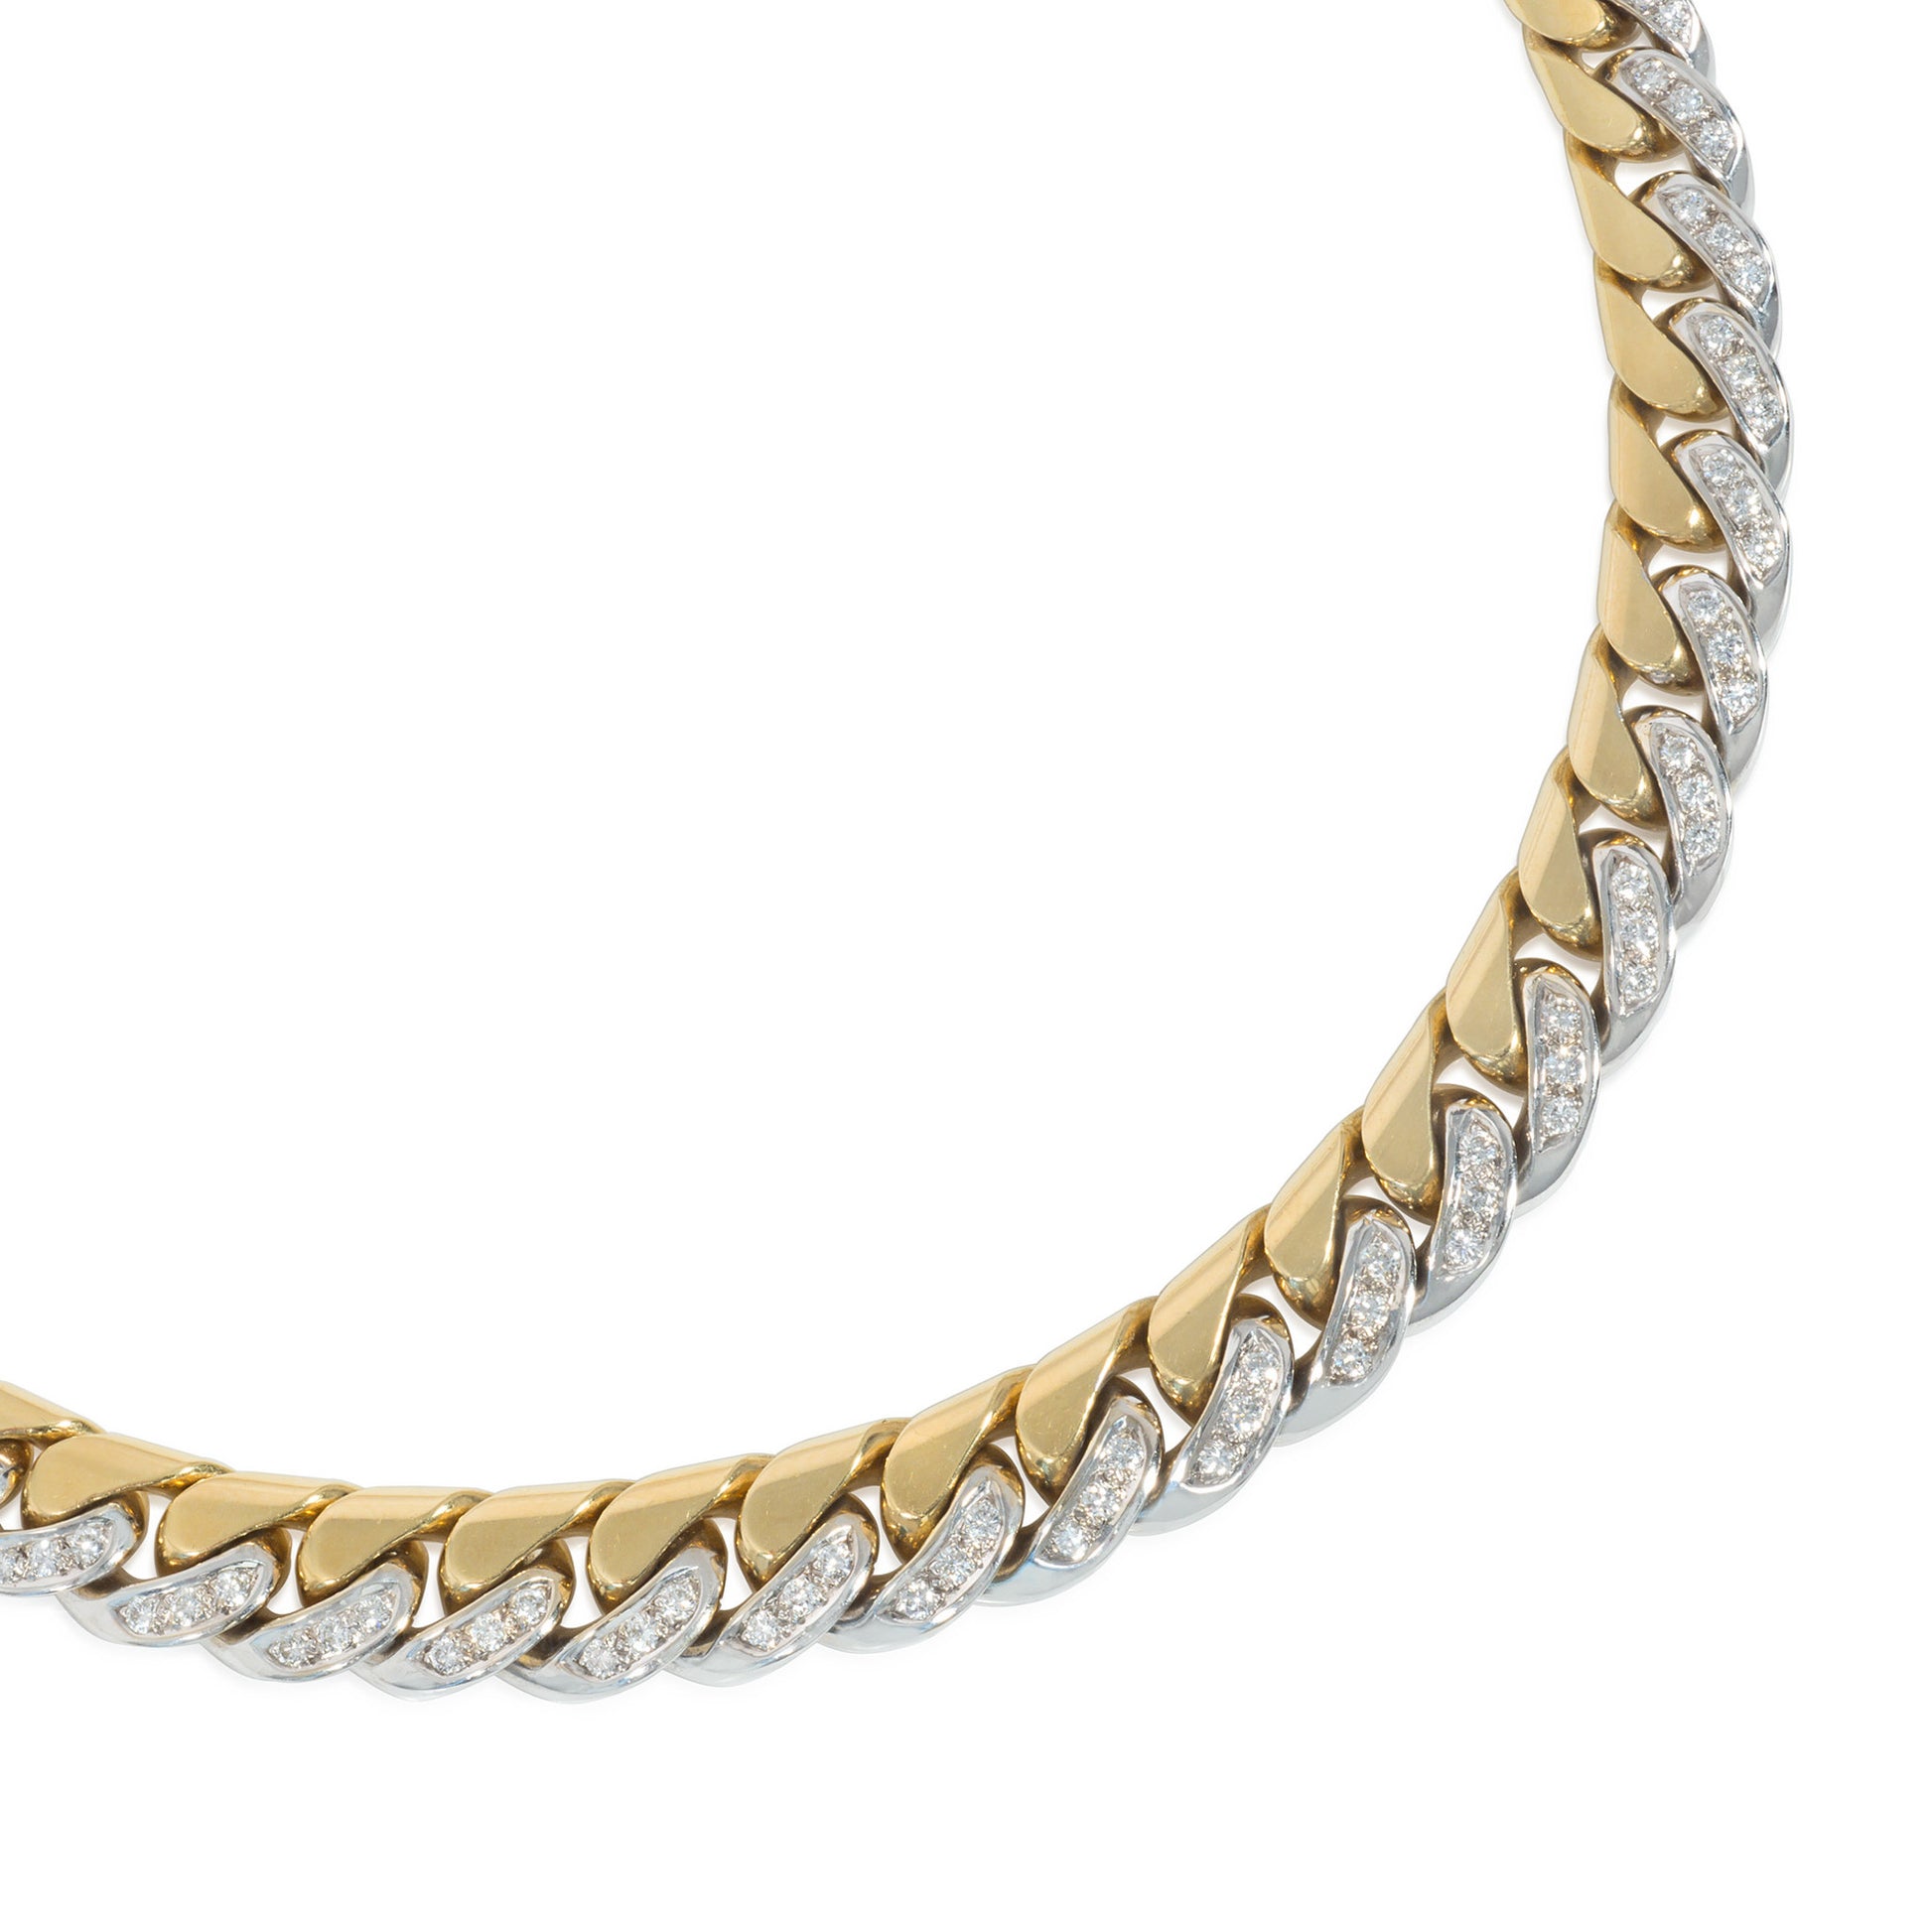 Bulgari Italy 1970s 18KT White & Yellow Gold Diamond Curblink Necklace close-up details